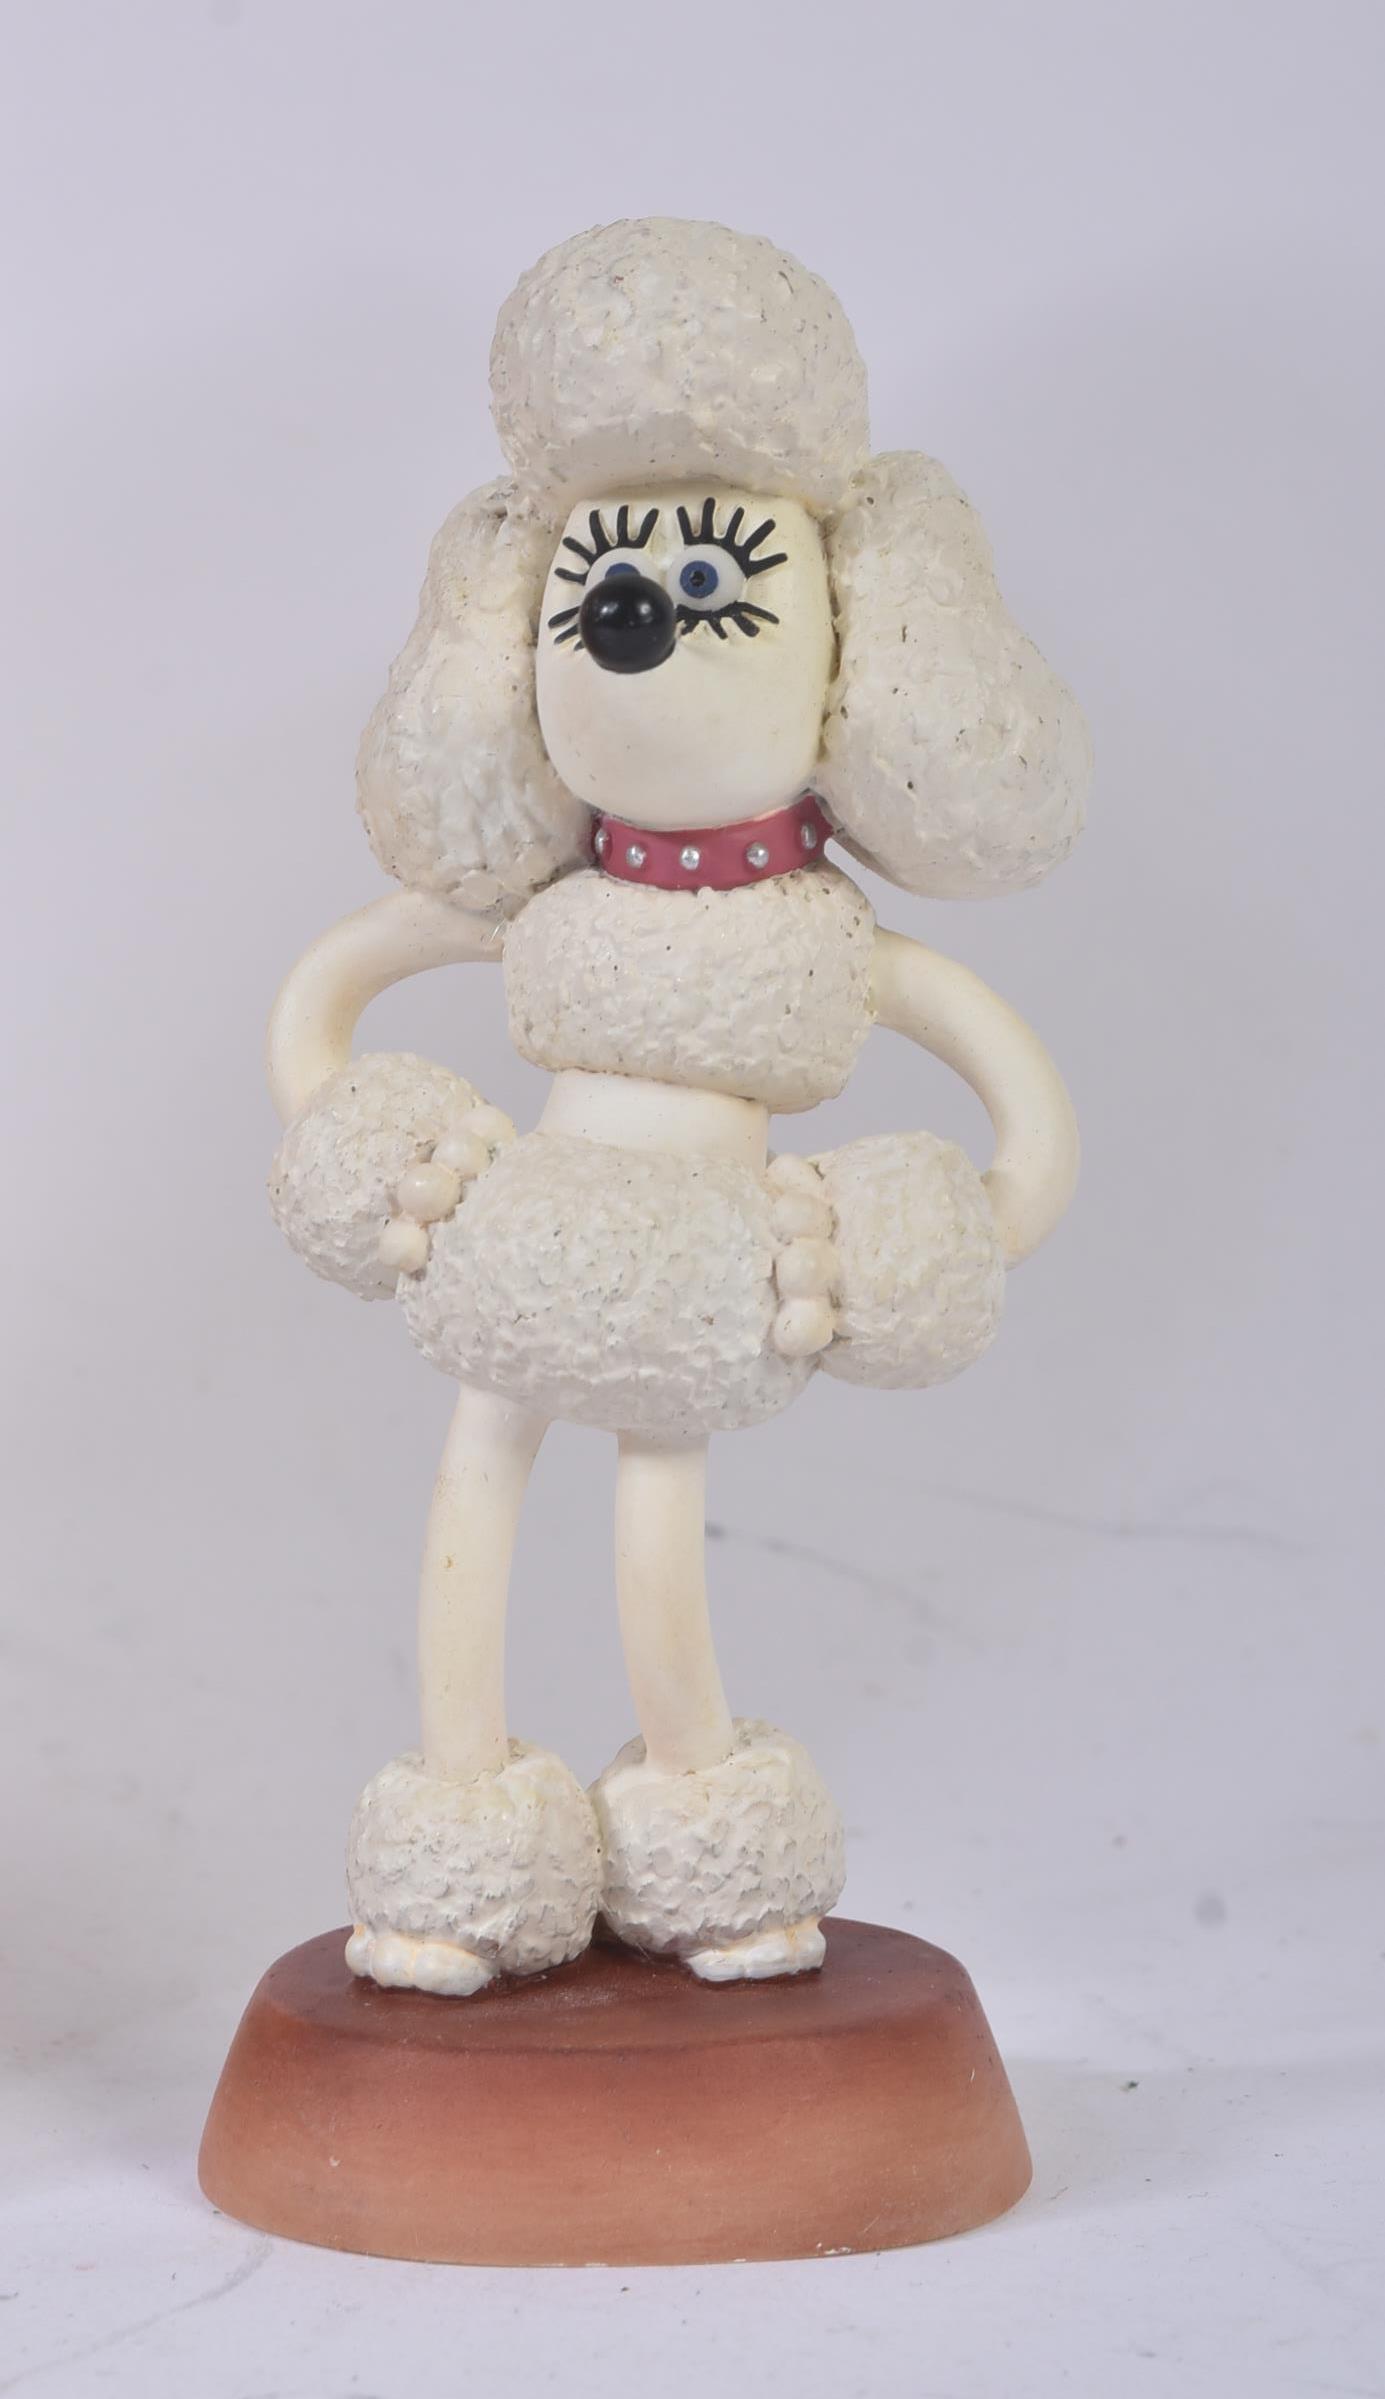 WALLACE & GROMIT - ROBERT HARROP - LIMITED EDITION FIGURINE - Image 2 of 4